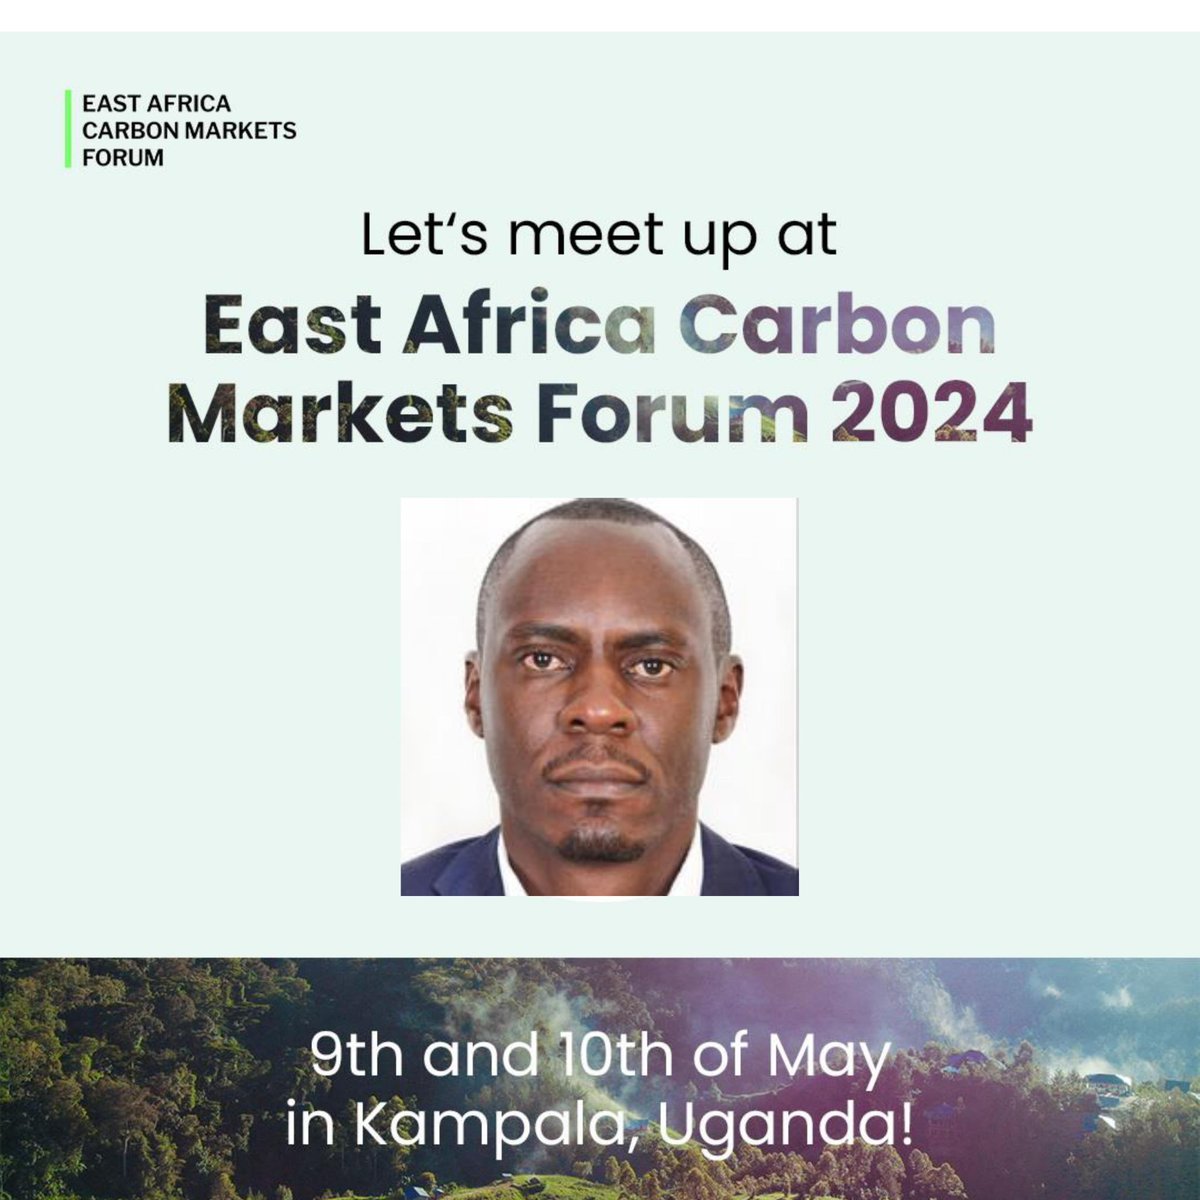 The East Africa Carbon Markets Forum in Kampala this week is an opportunity for leaders & enthusiasts in the carbon market sector to come together, share insights, and forge new paths towards sustainability.

#EastAfricaCarbonMarketsForum #carbonmarkets #EACMF2024 #CarbonMarkets